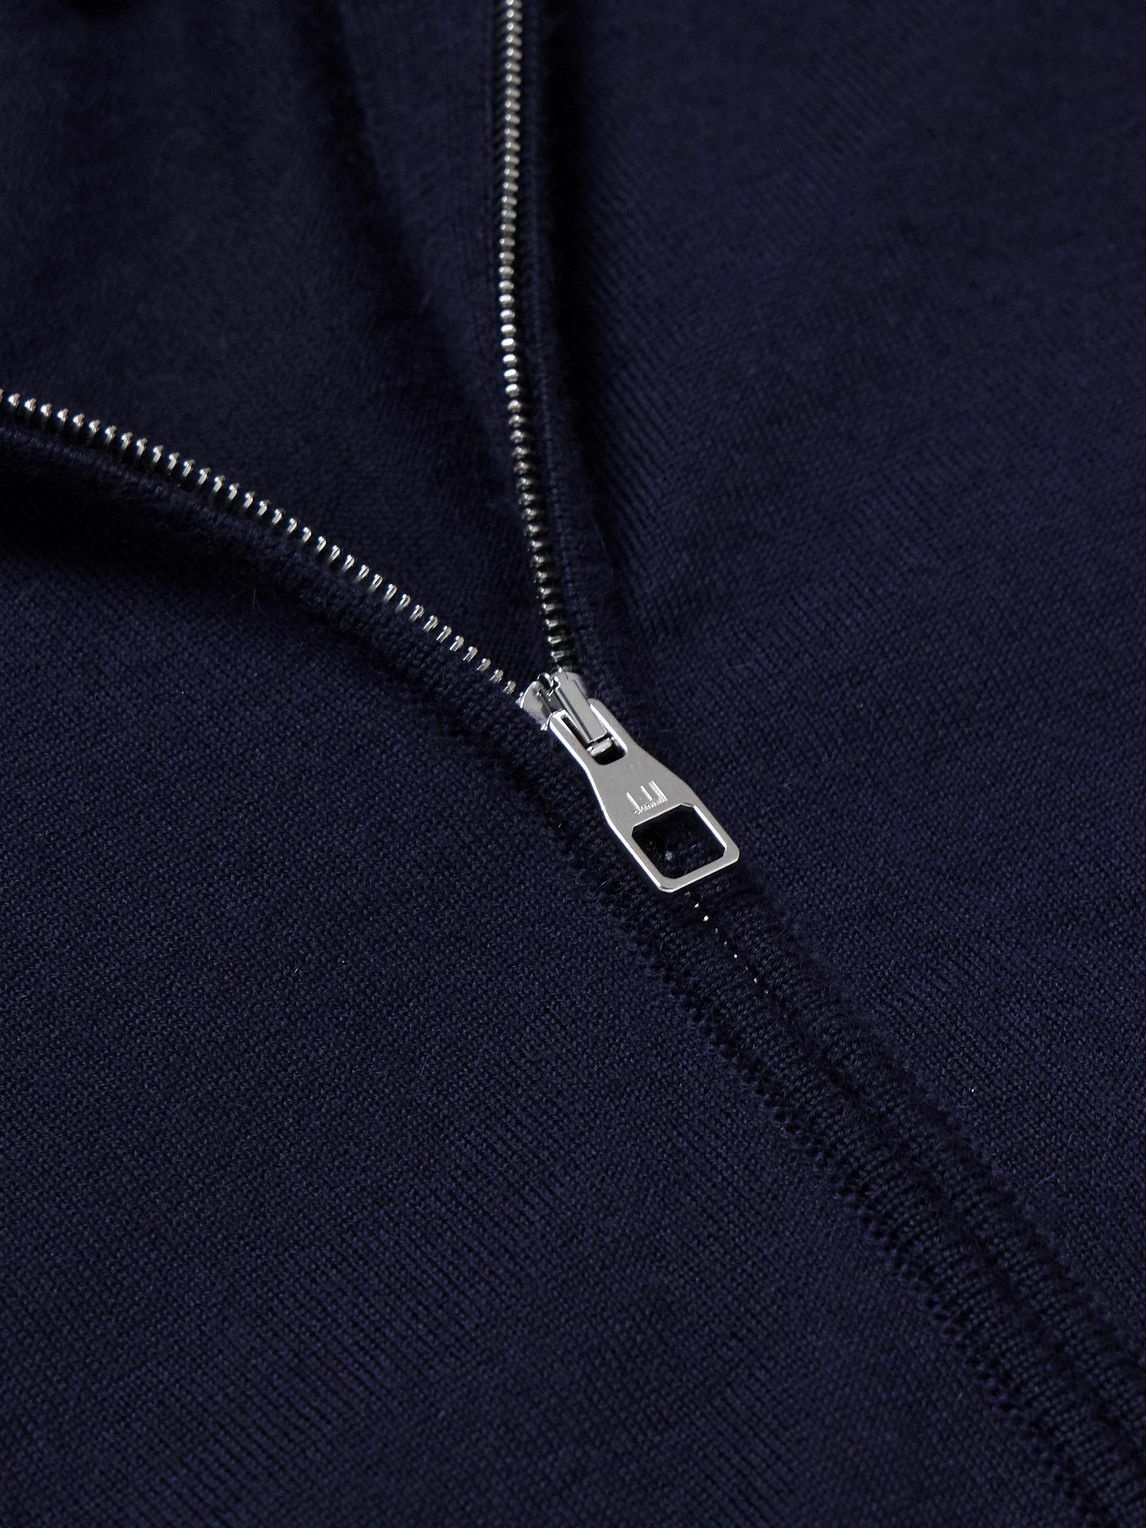 Dunhill - Cashmere Half-Zip Sweater - Blue Dunhill